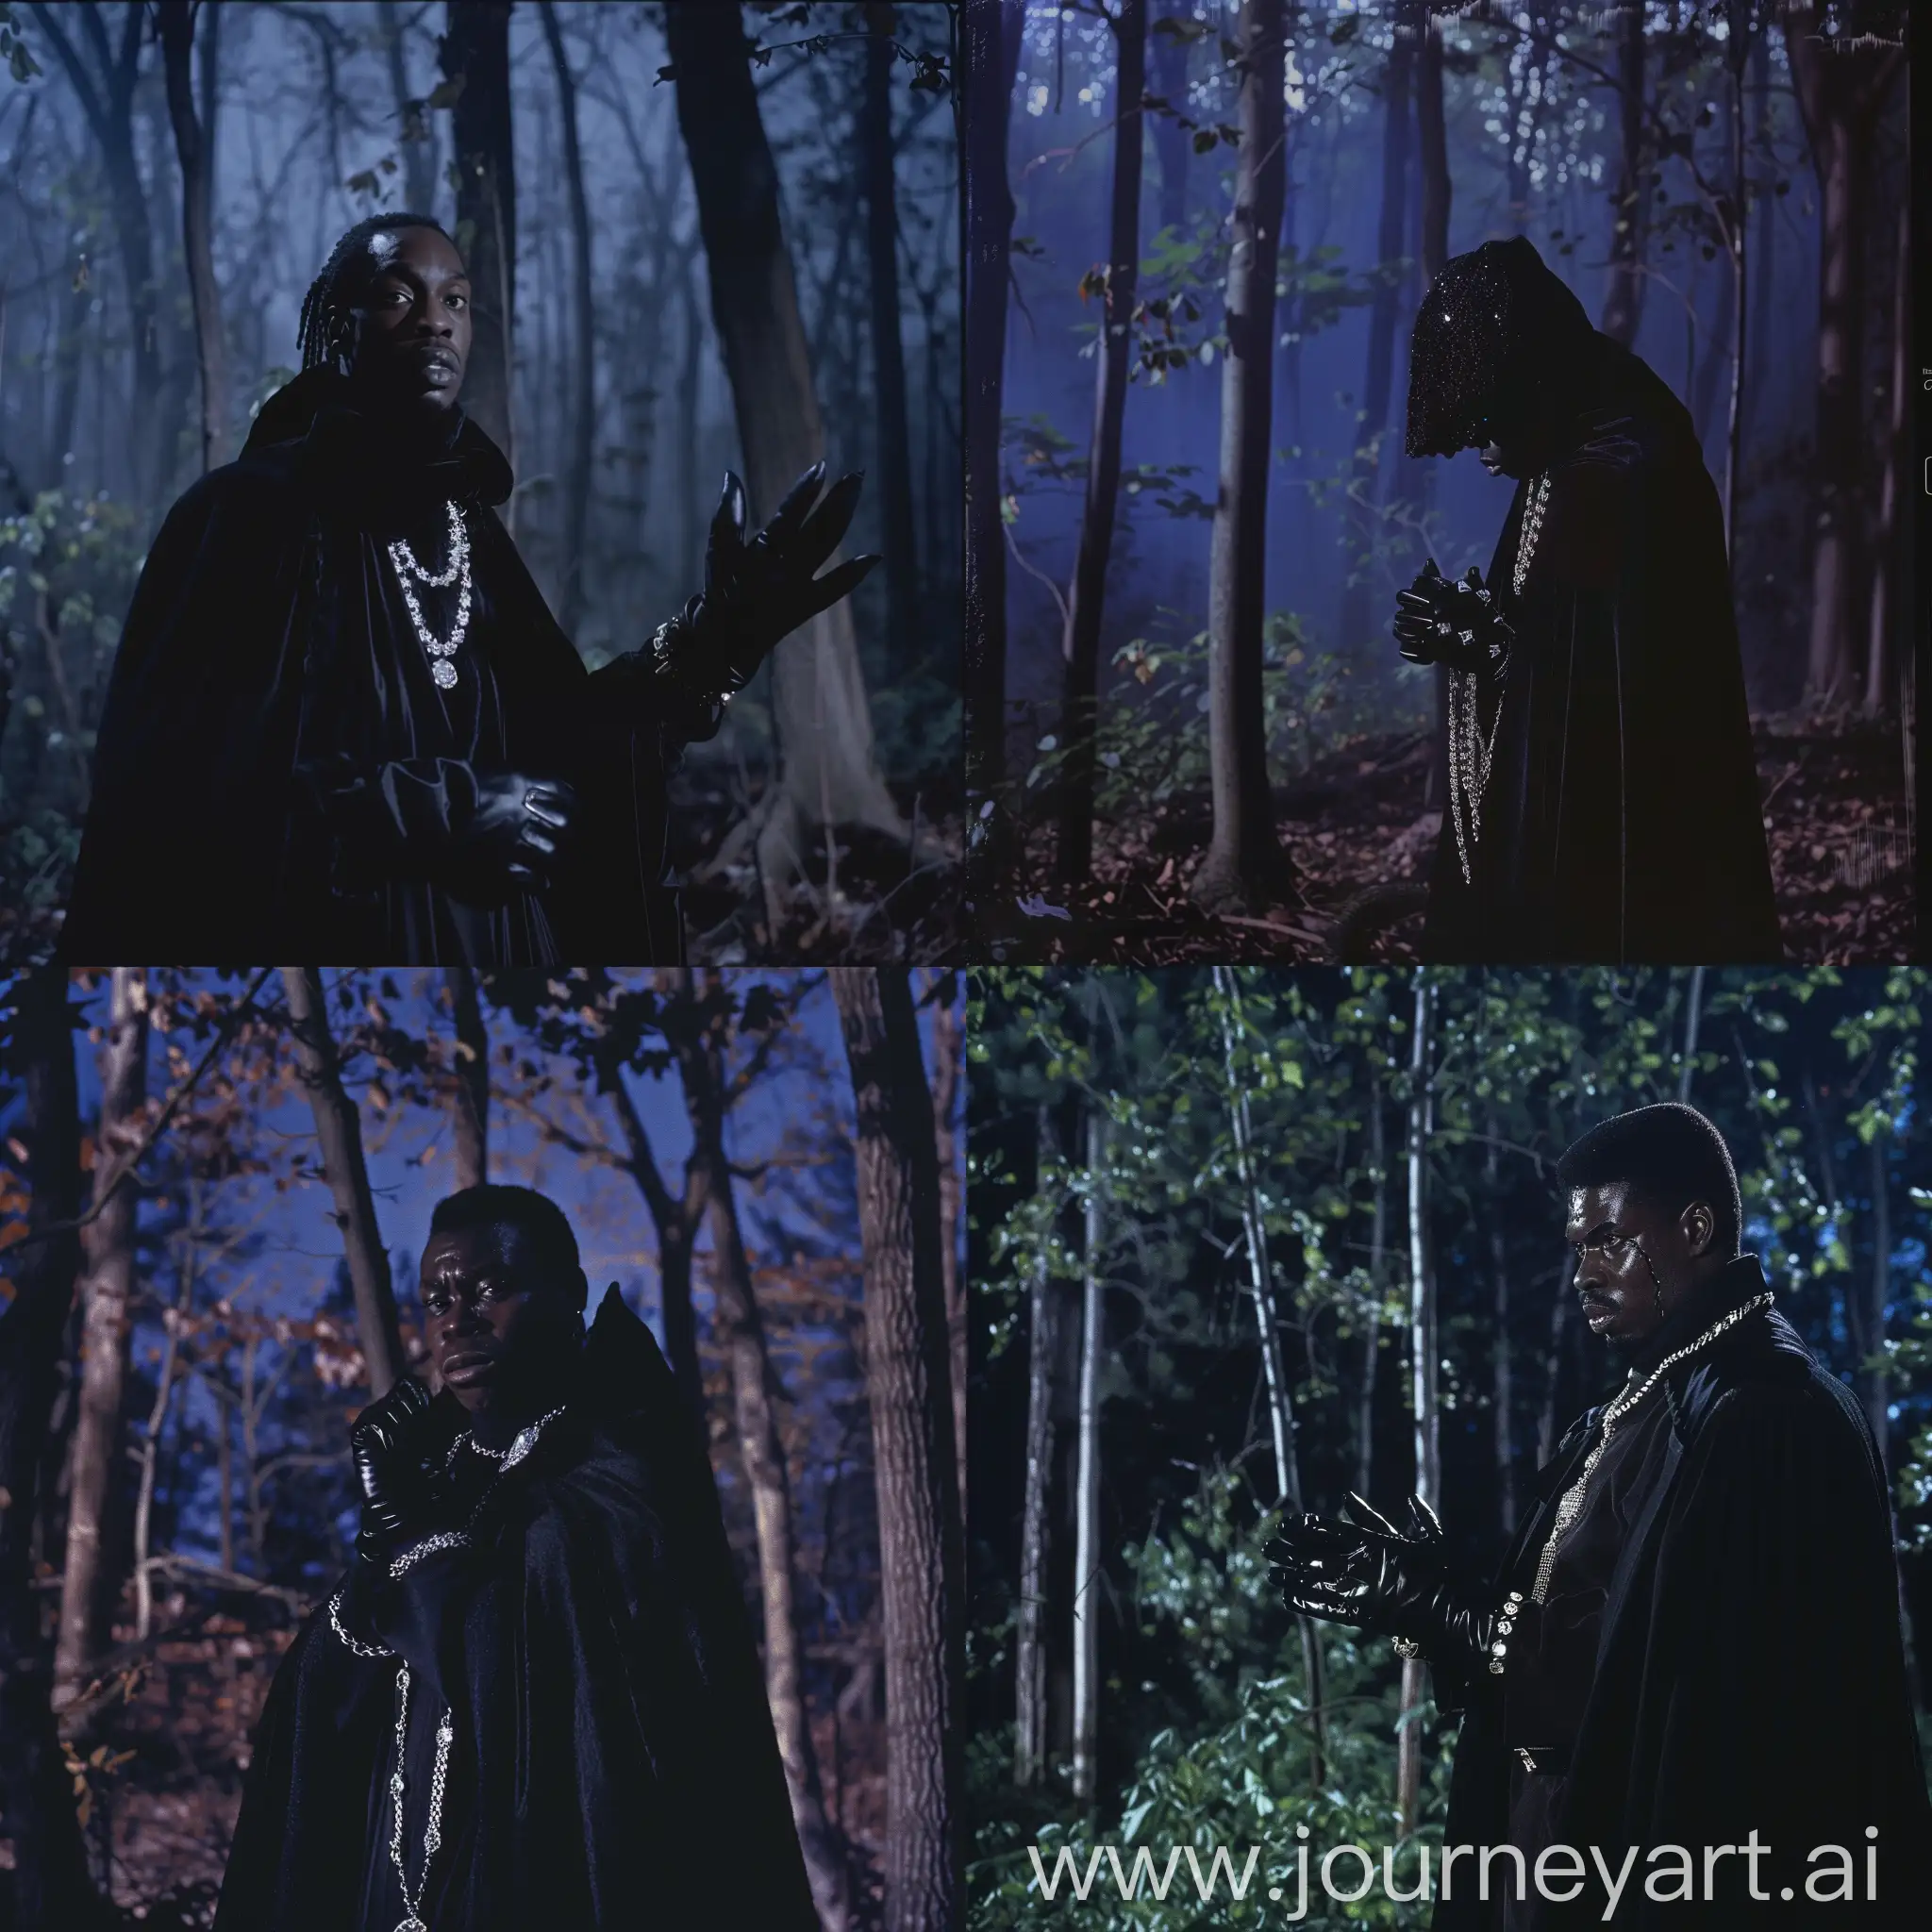 A 1990s VHS footage,Of A Forest at Night,With a black man in a black cloak,and dimond chains,and black gloves